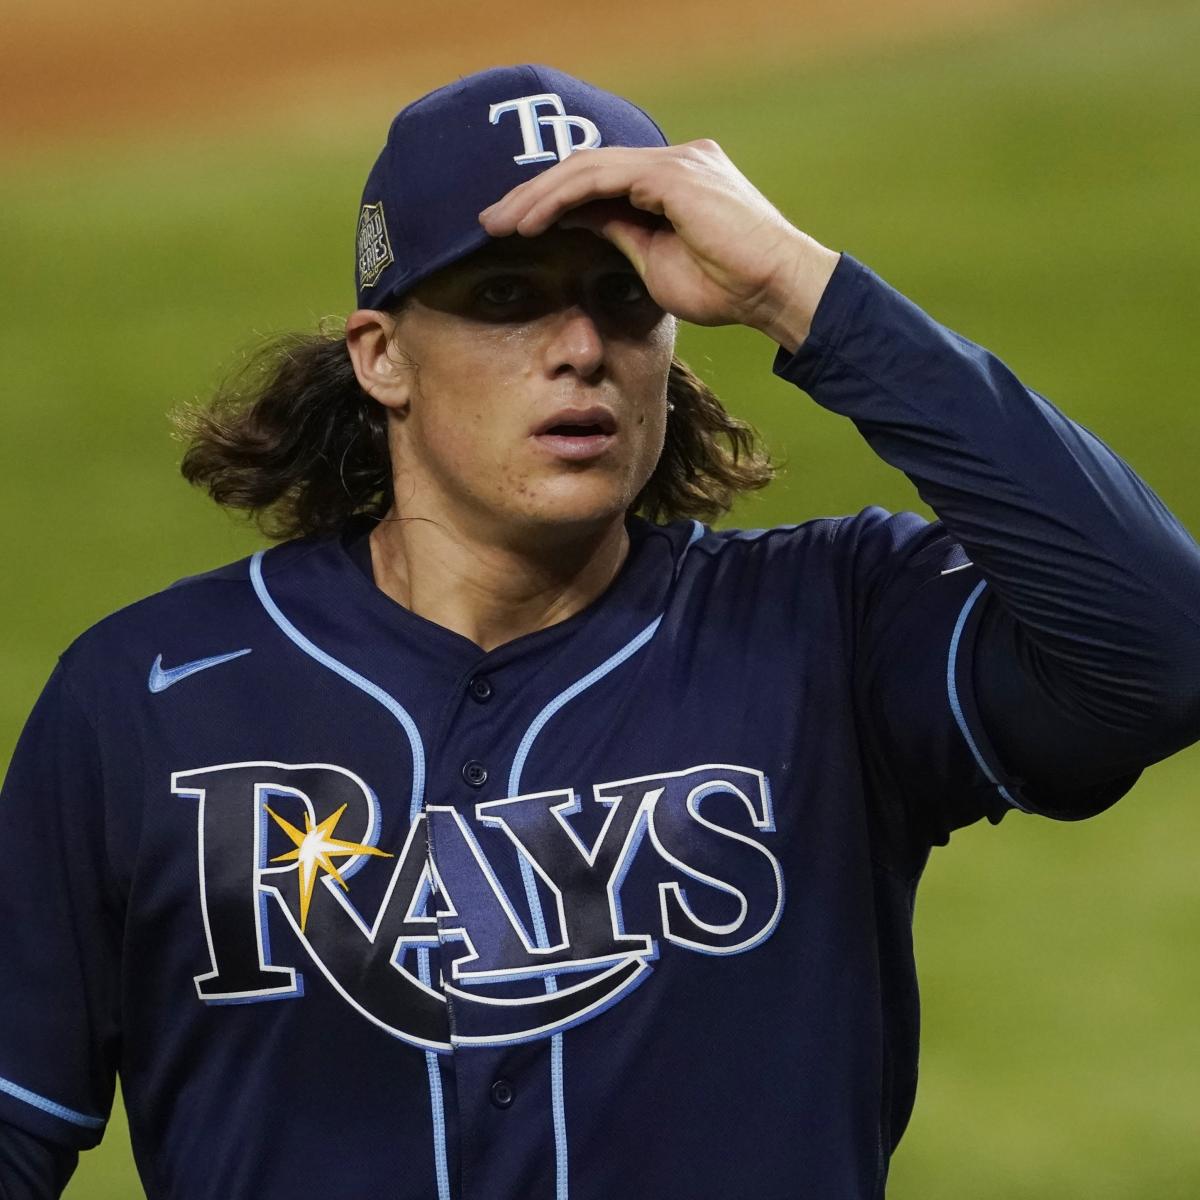 Meet the Rays: MLB’s Big Unknown Tasked with Beating Dodgers Superteam